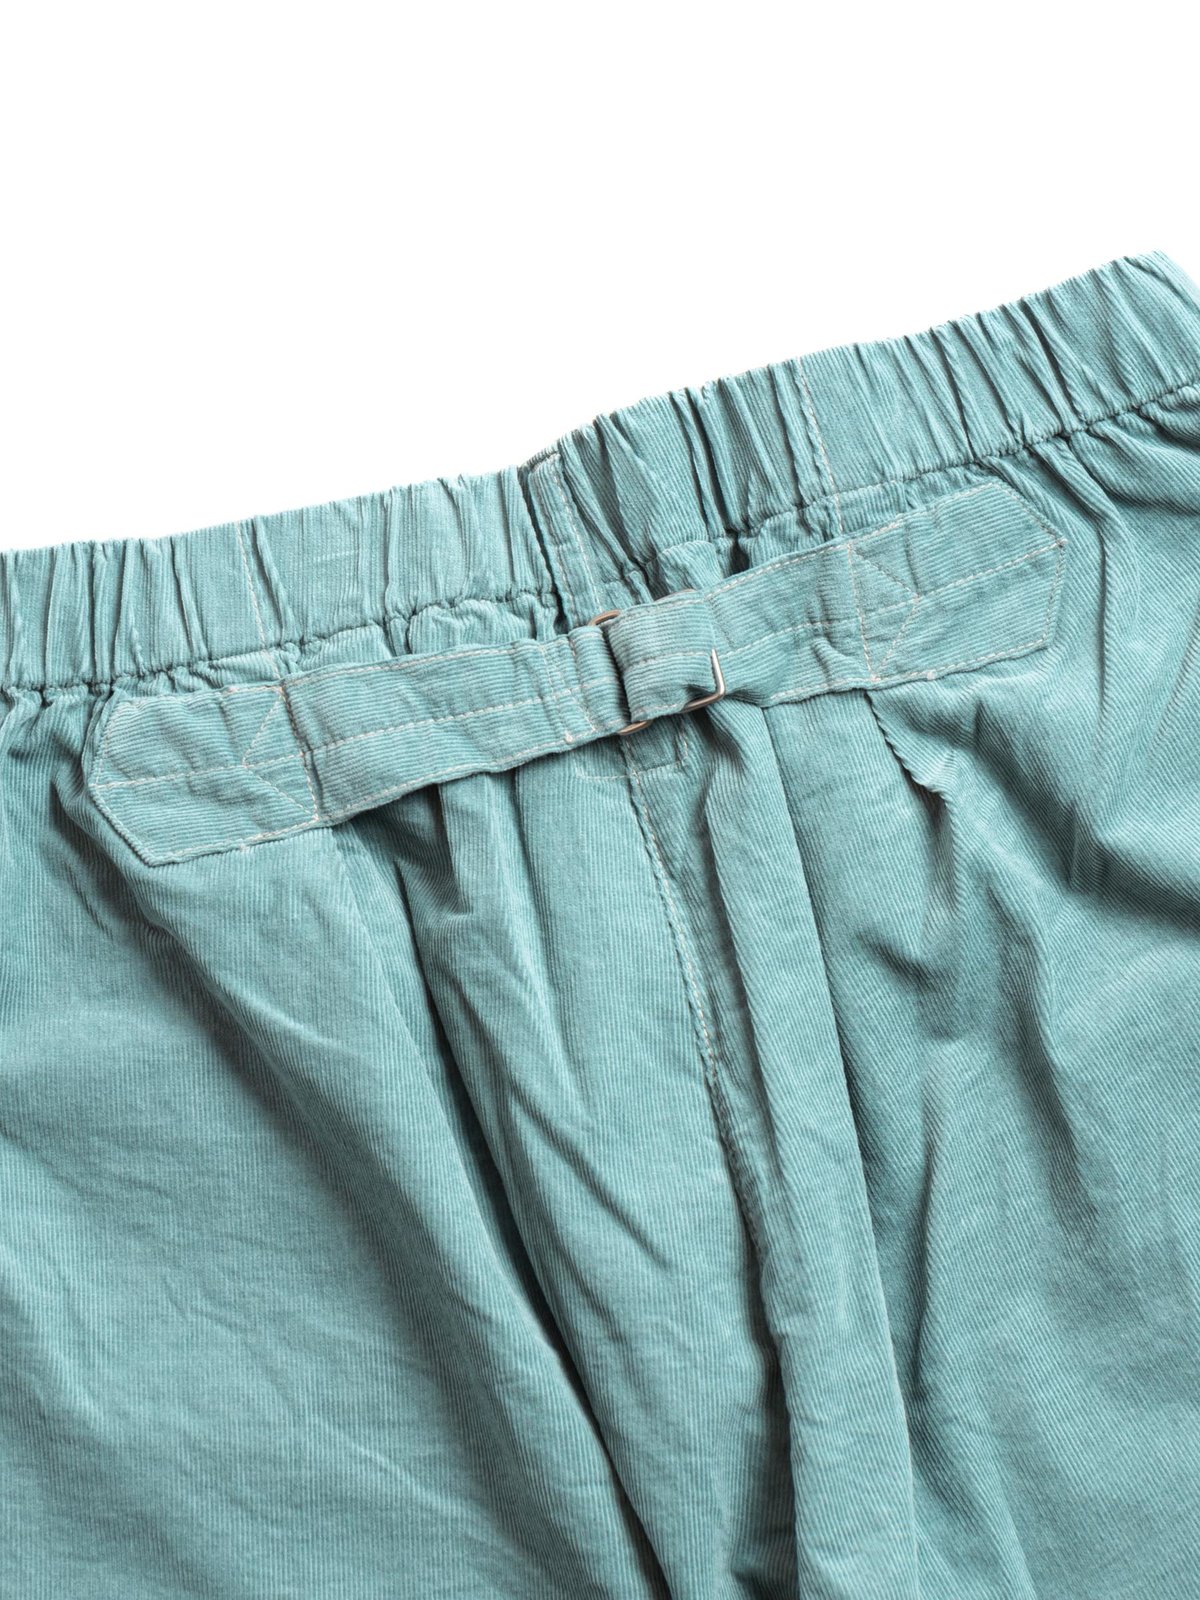 E–Z LAX 4 SHORTS SUMMER CORDS MUSCAT GREEN - Image 4